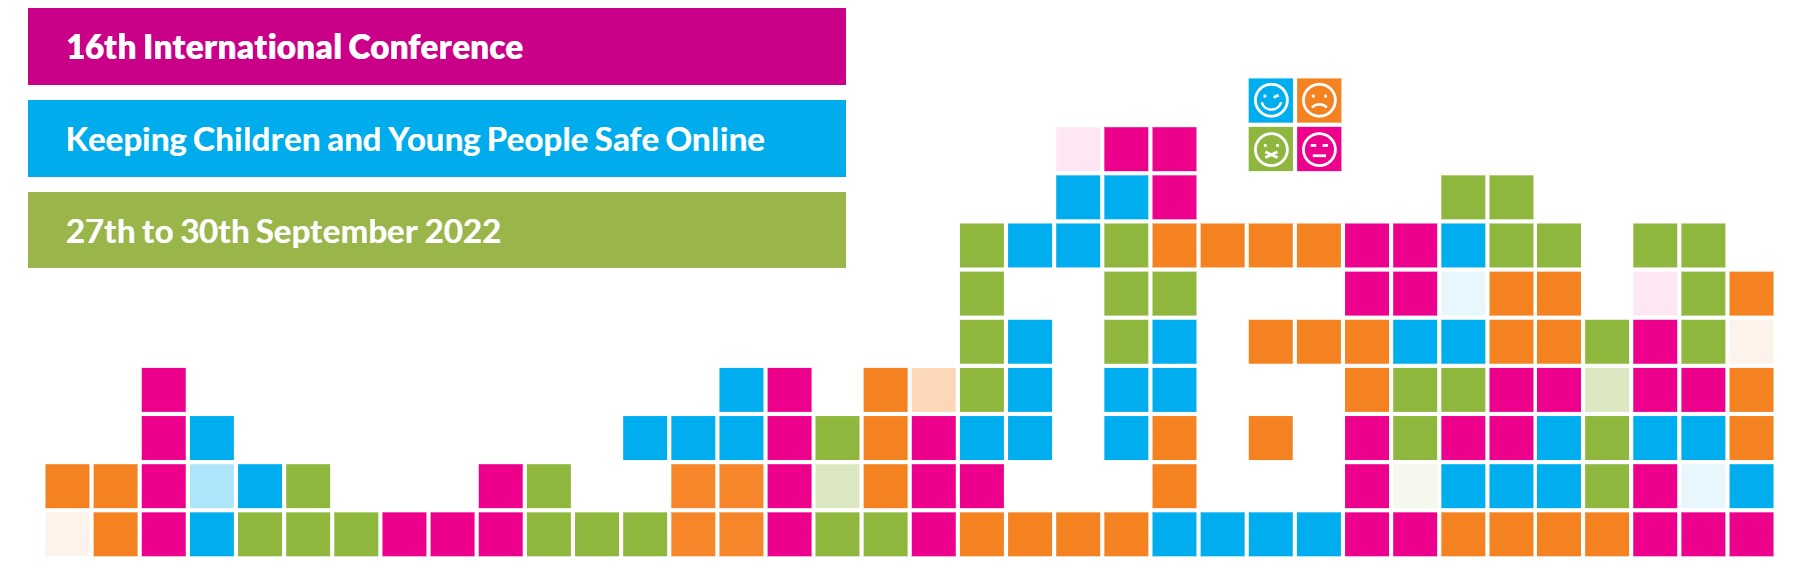 The 16th International Conference Keeping Children and Young People Safe Online - ITU’s Workshops on “The importance of capacity building to ensure child online protection: An ITU demonstration” - 29 September 2022 from 10:00 to 12:00 CEST